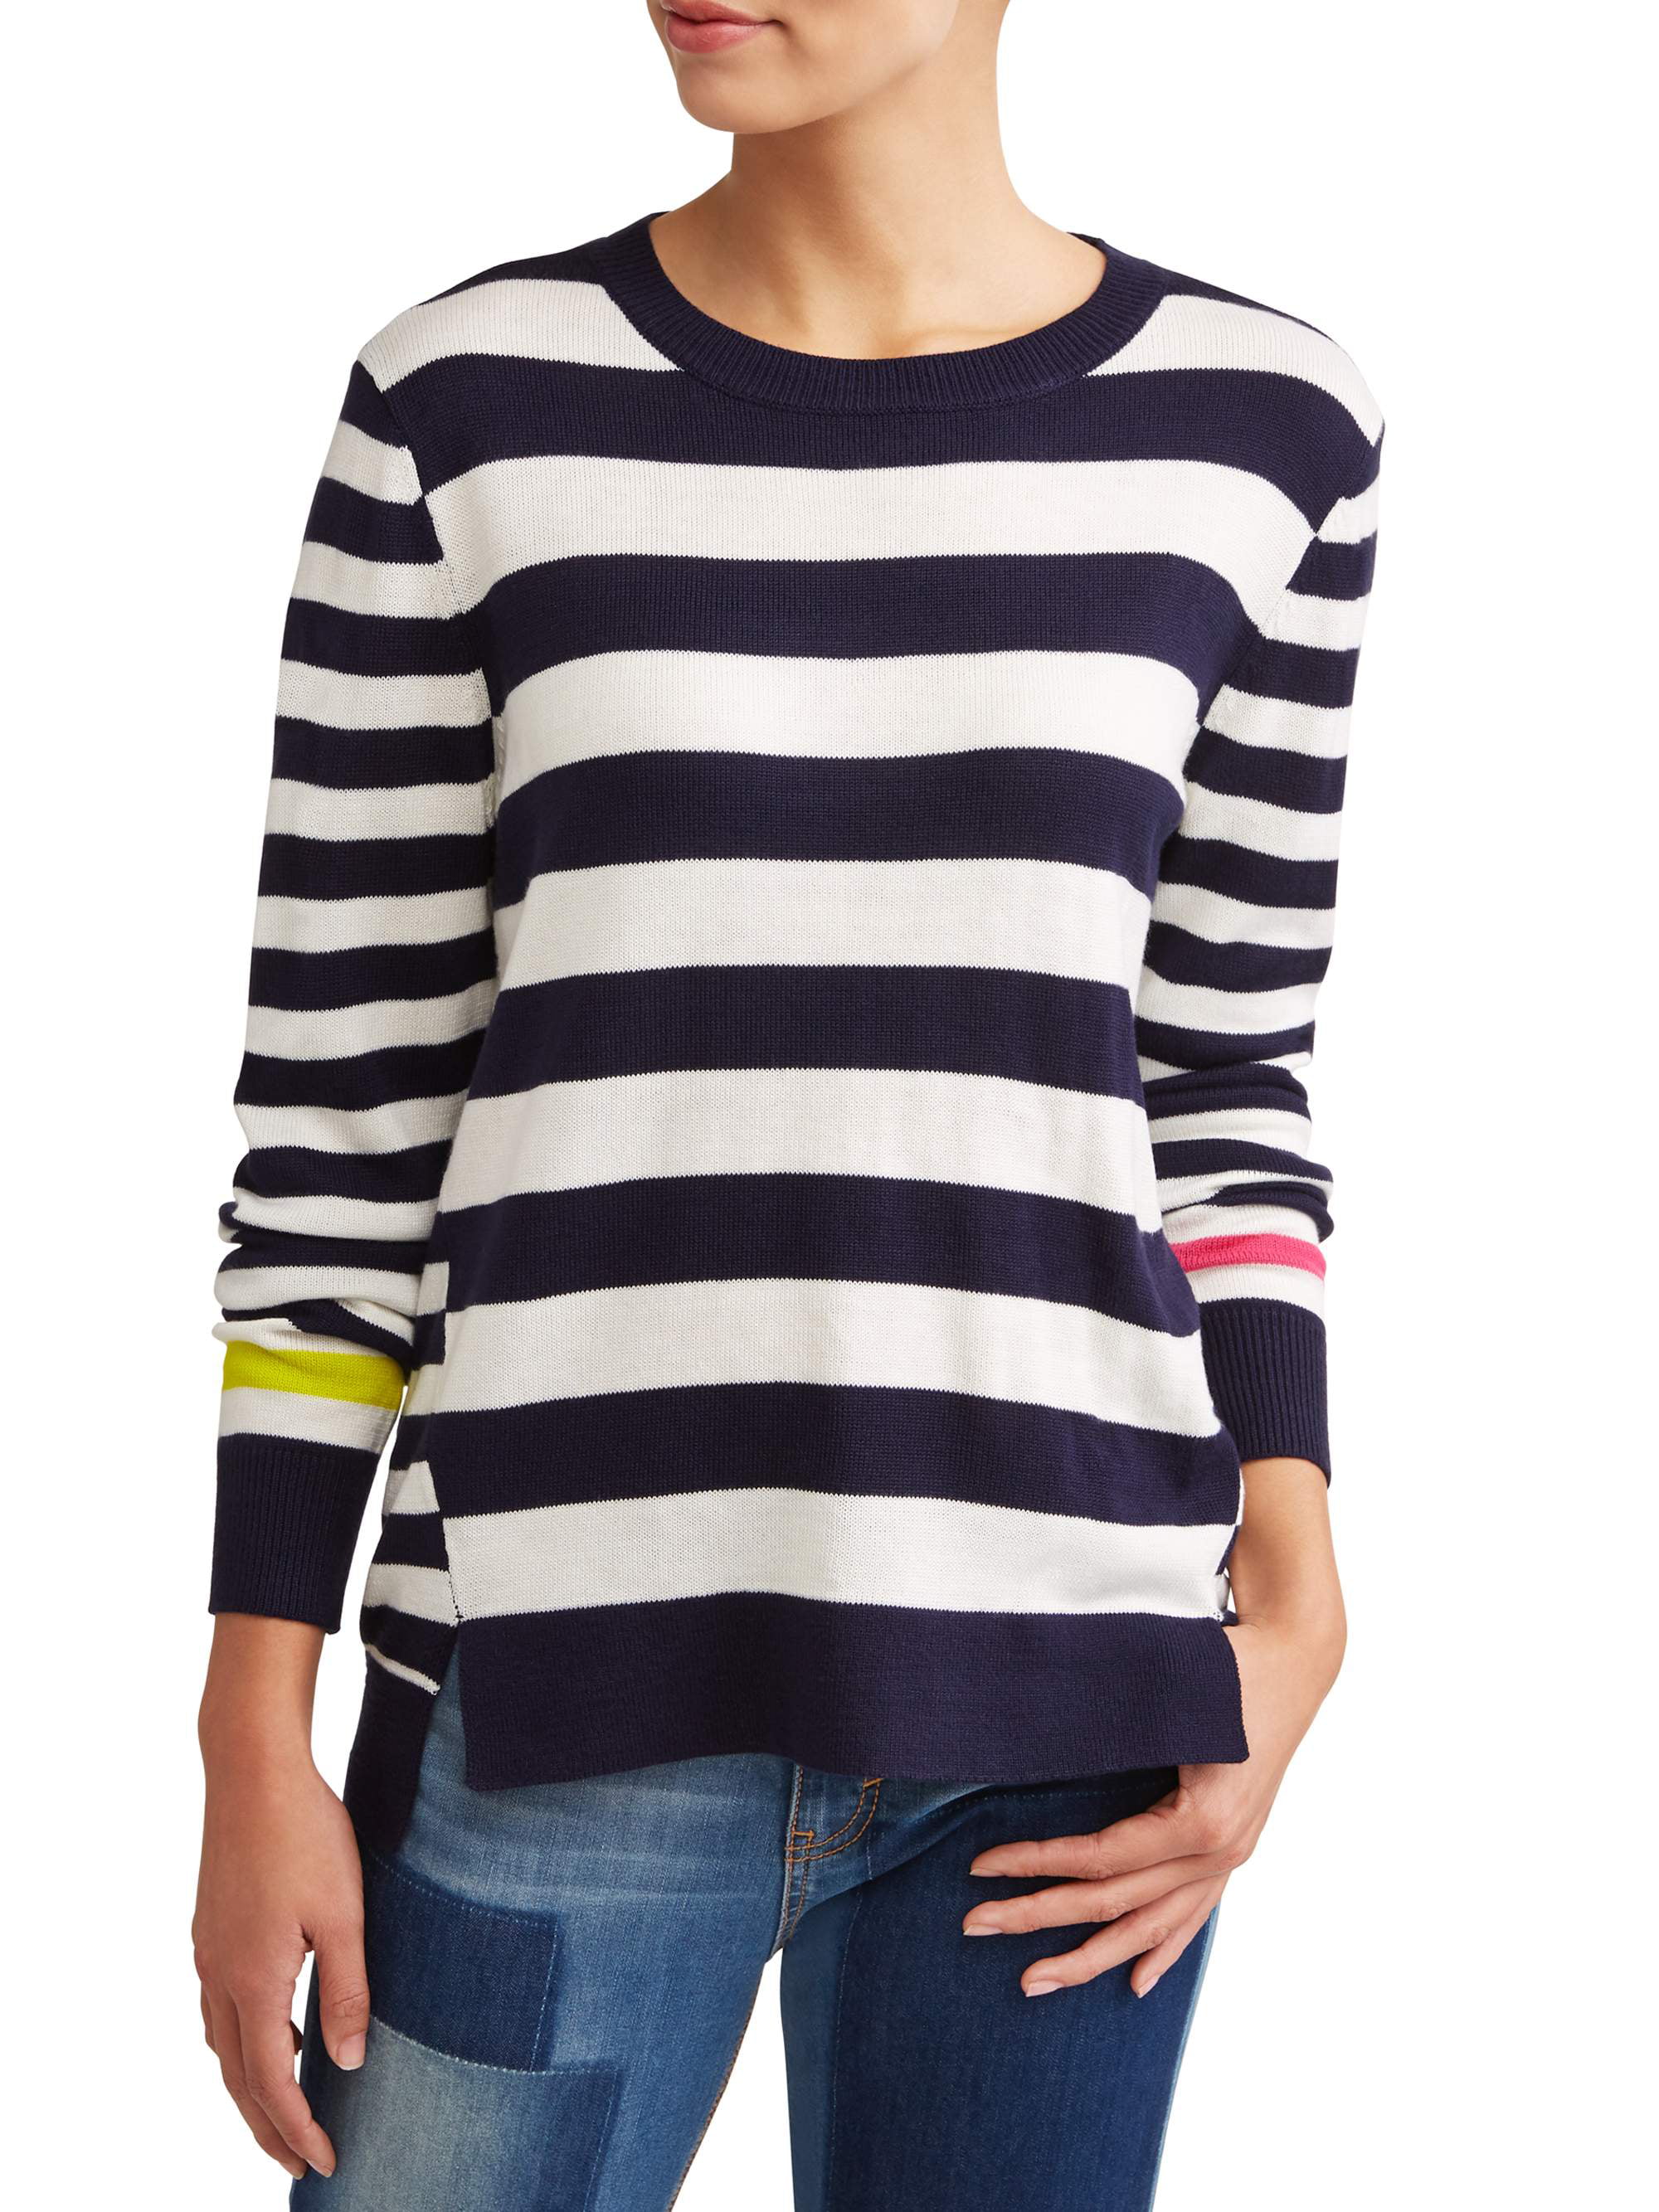 EV1 from Ellen DeGeneres - EV1 from Ellen DeGeneres striped high-low ...